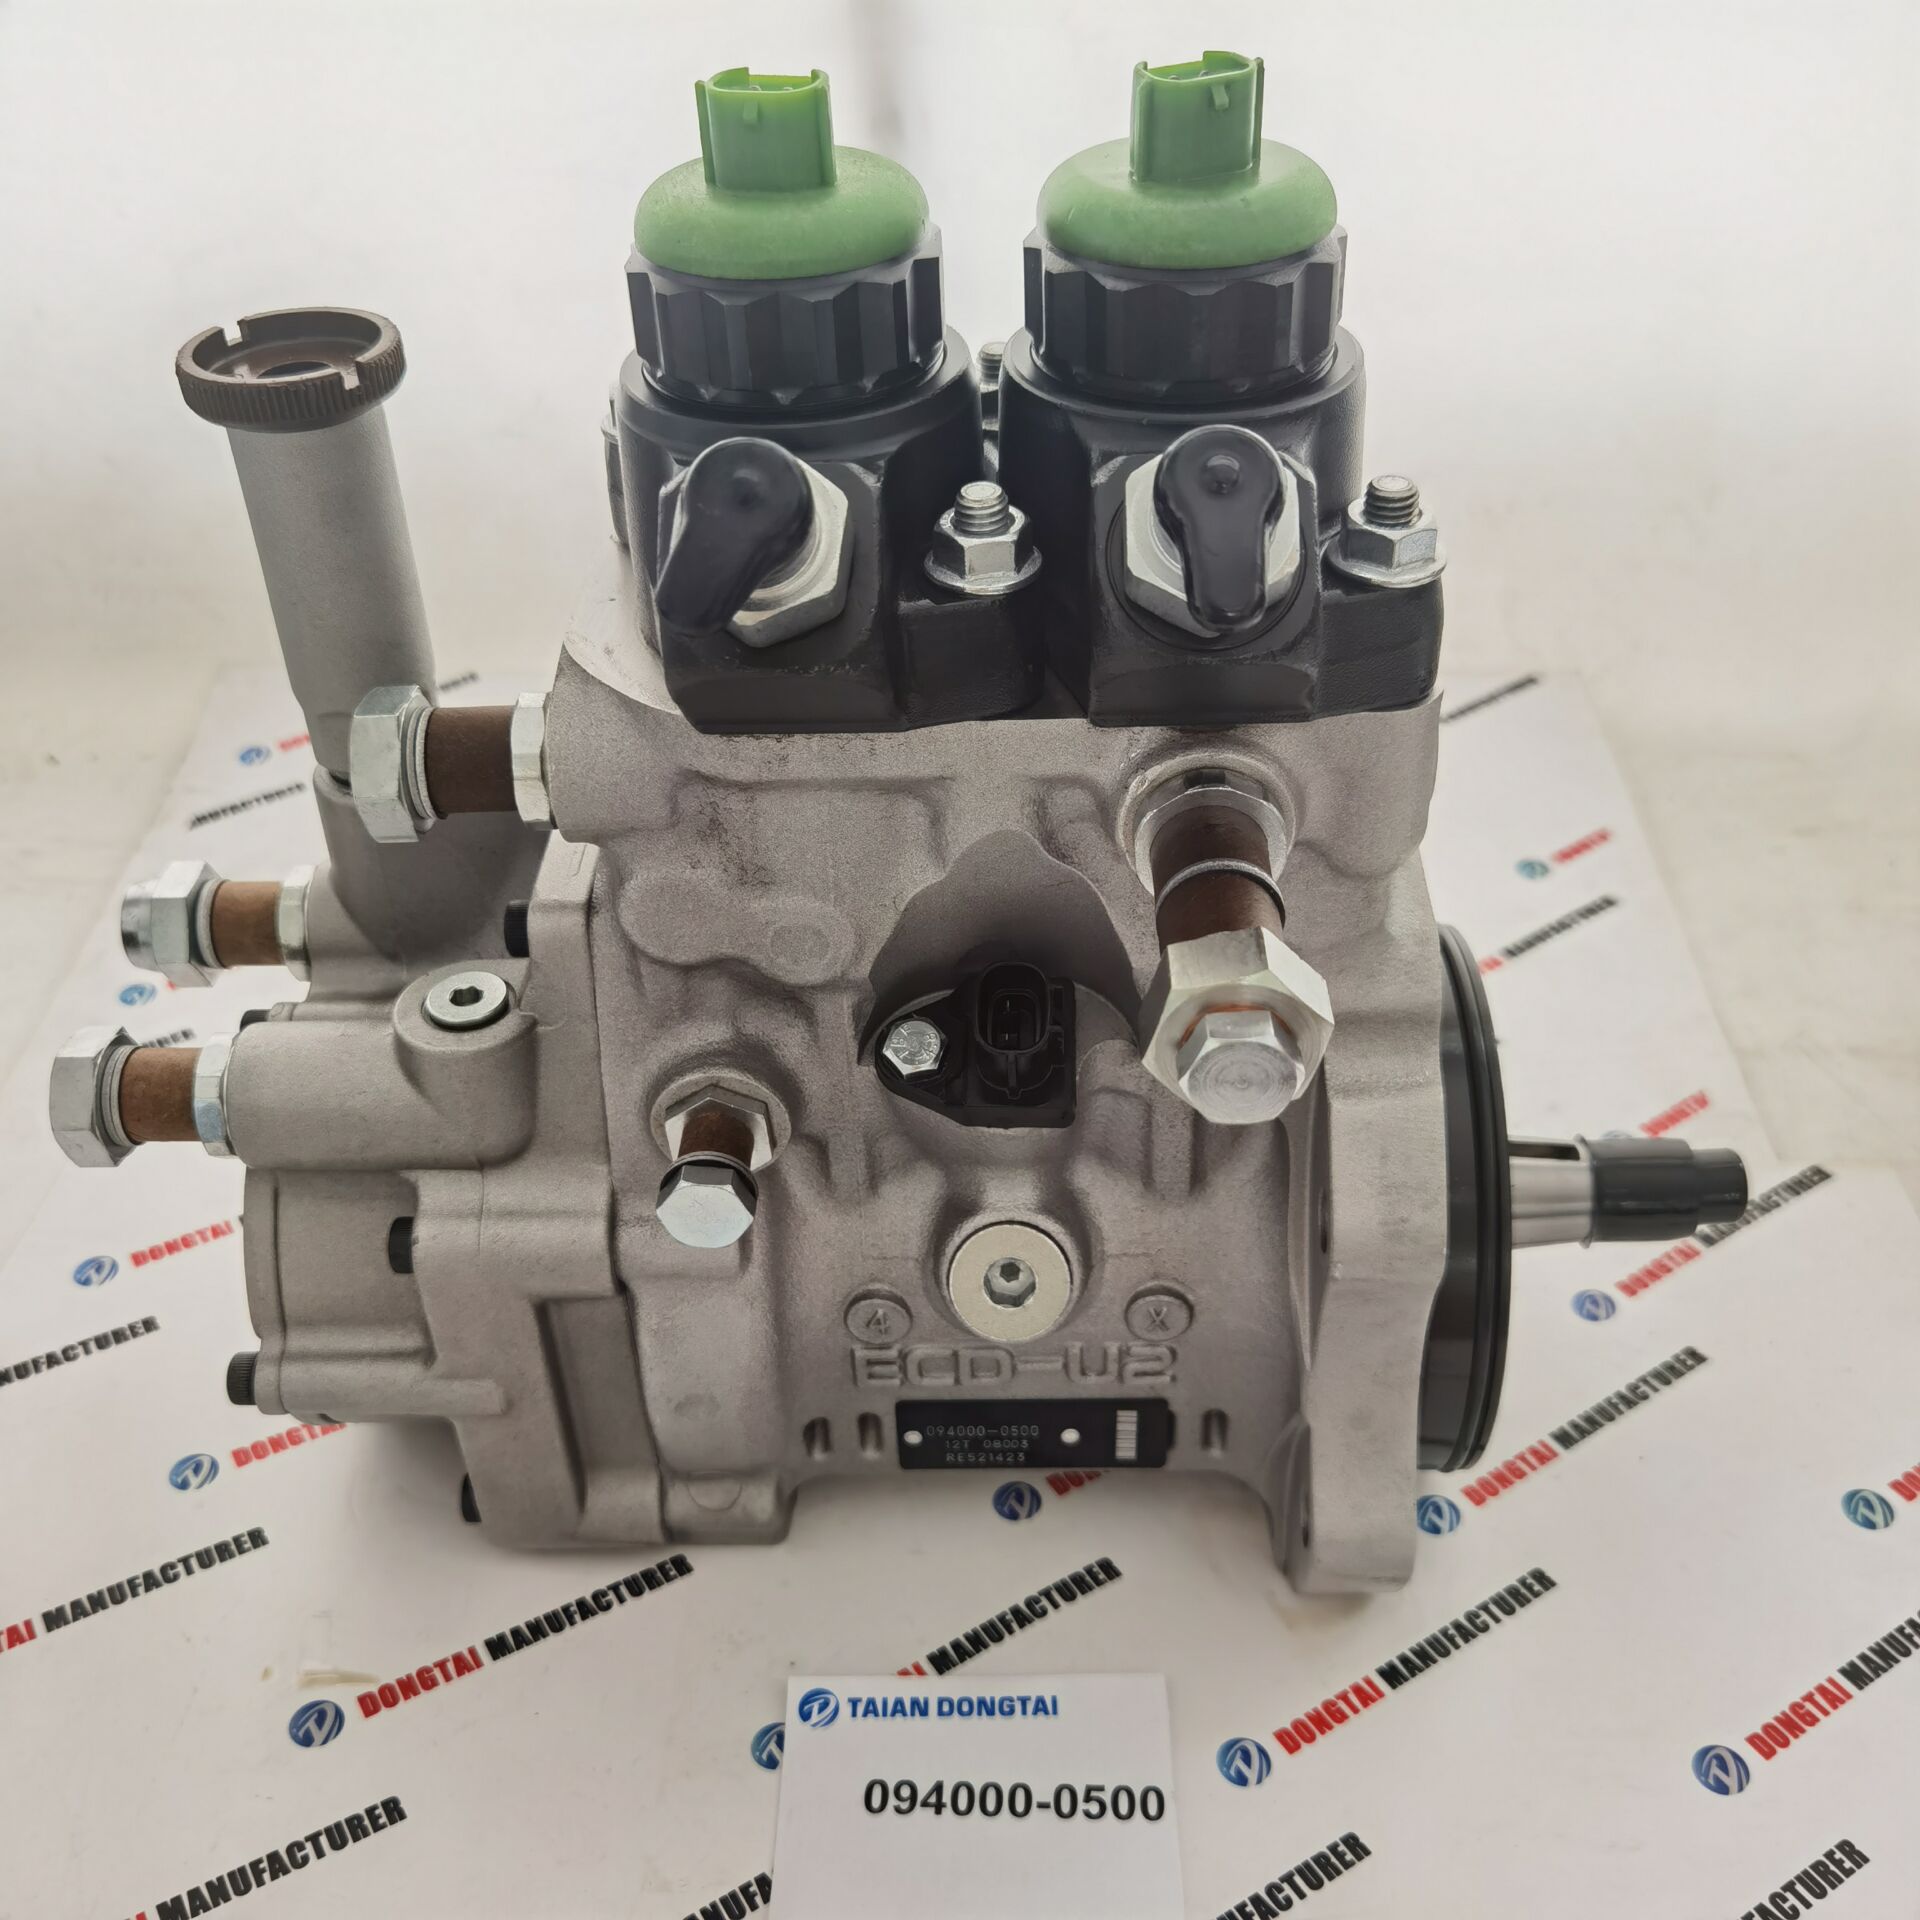 PriceList for Cummins Ism Nozzle - DENSO Fuel Injection Pump 094000-0500 (RE521423, SE501921) For john Deere – Dongtai